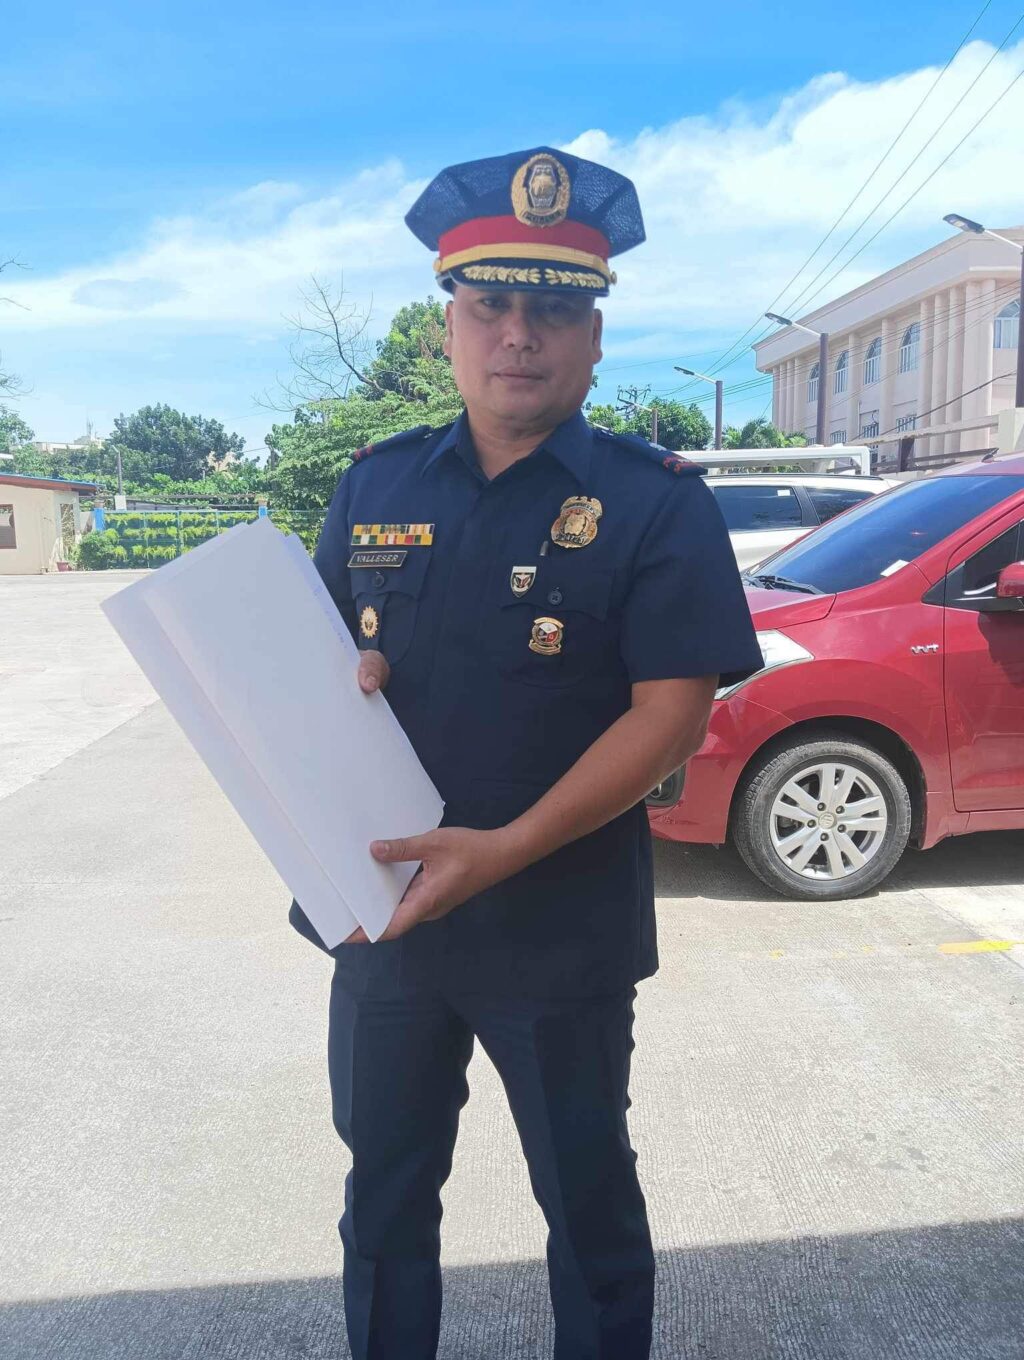 Police Major Angelito Valleser shows the documentary evidences that they attached to the murder charge against Simeon Gabutero Jr. and his younger brother.